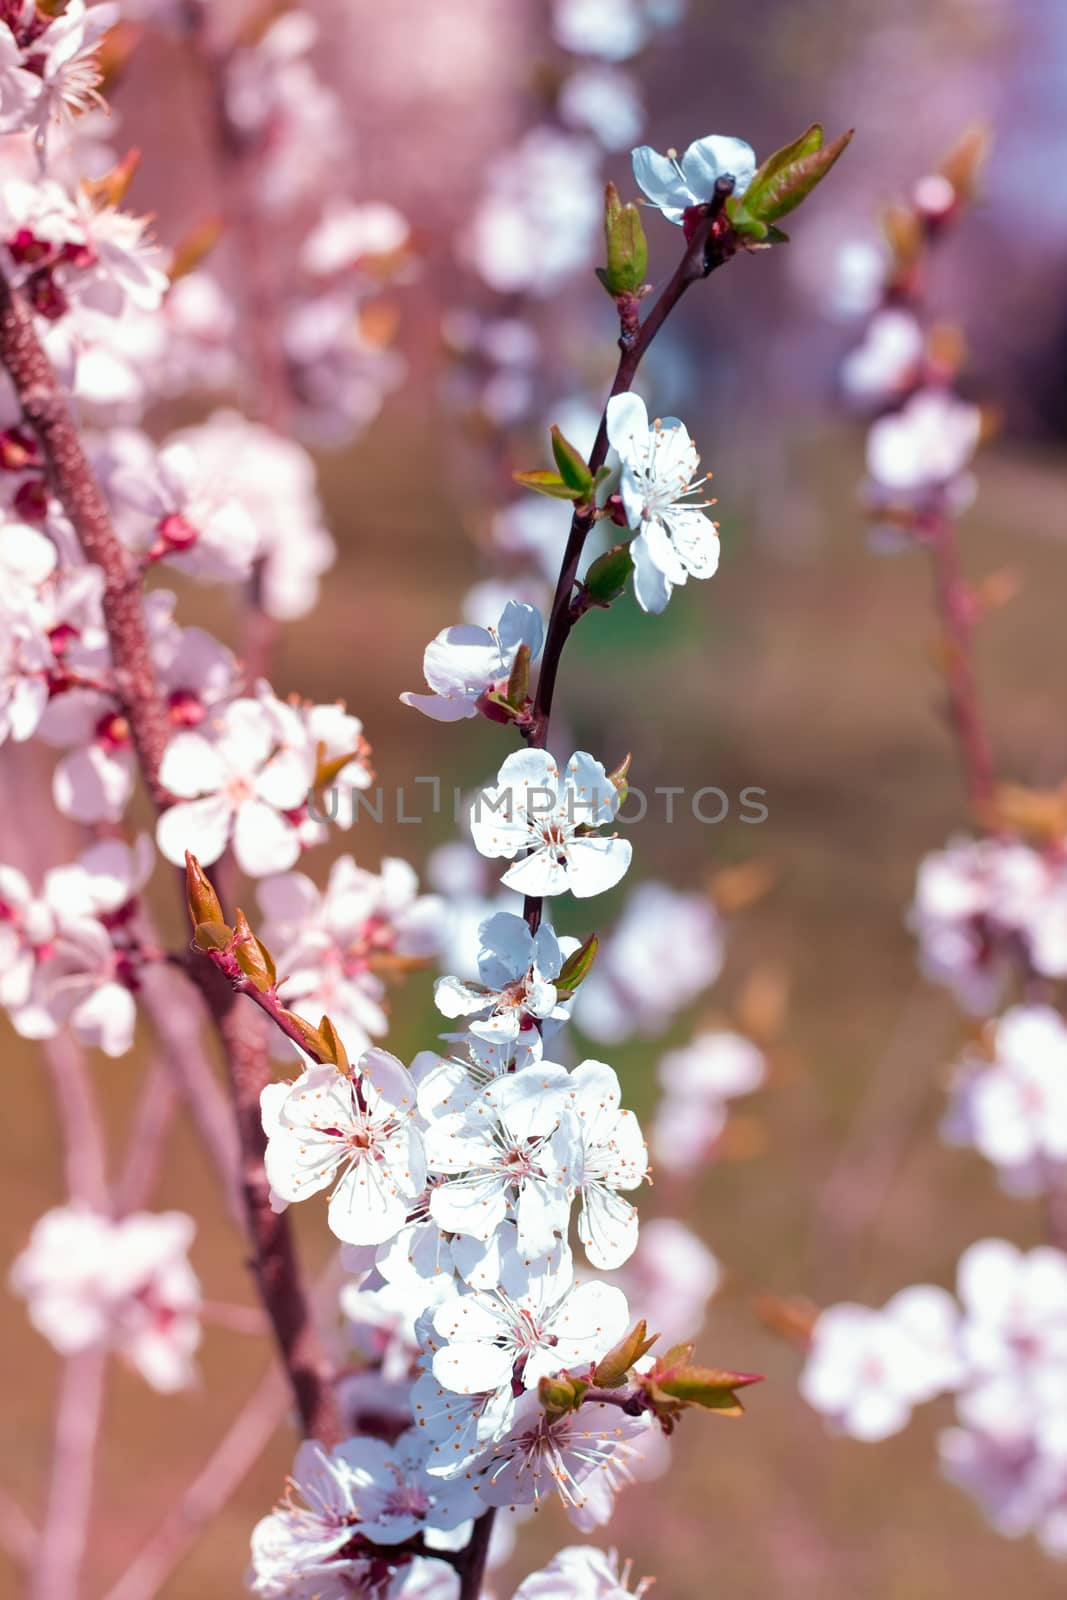 Postcard of fresh blossom flowers on spring cherry tree close-up on colourful bokeh blur background